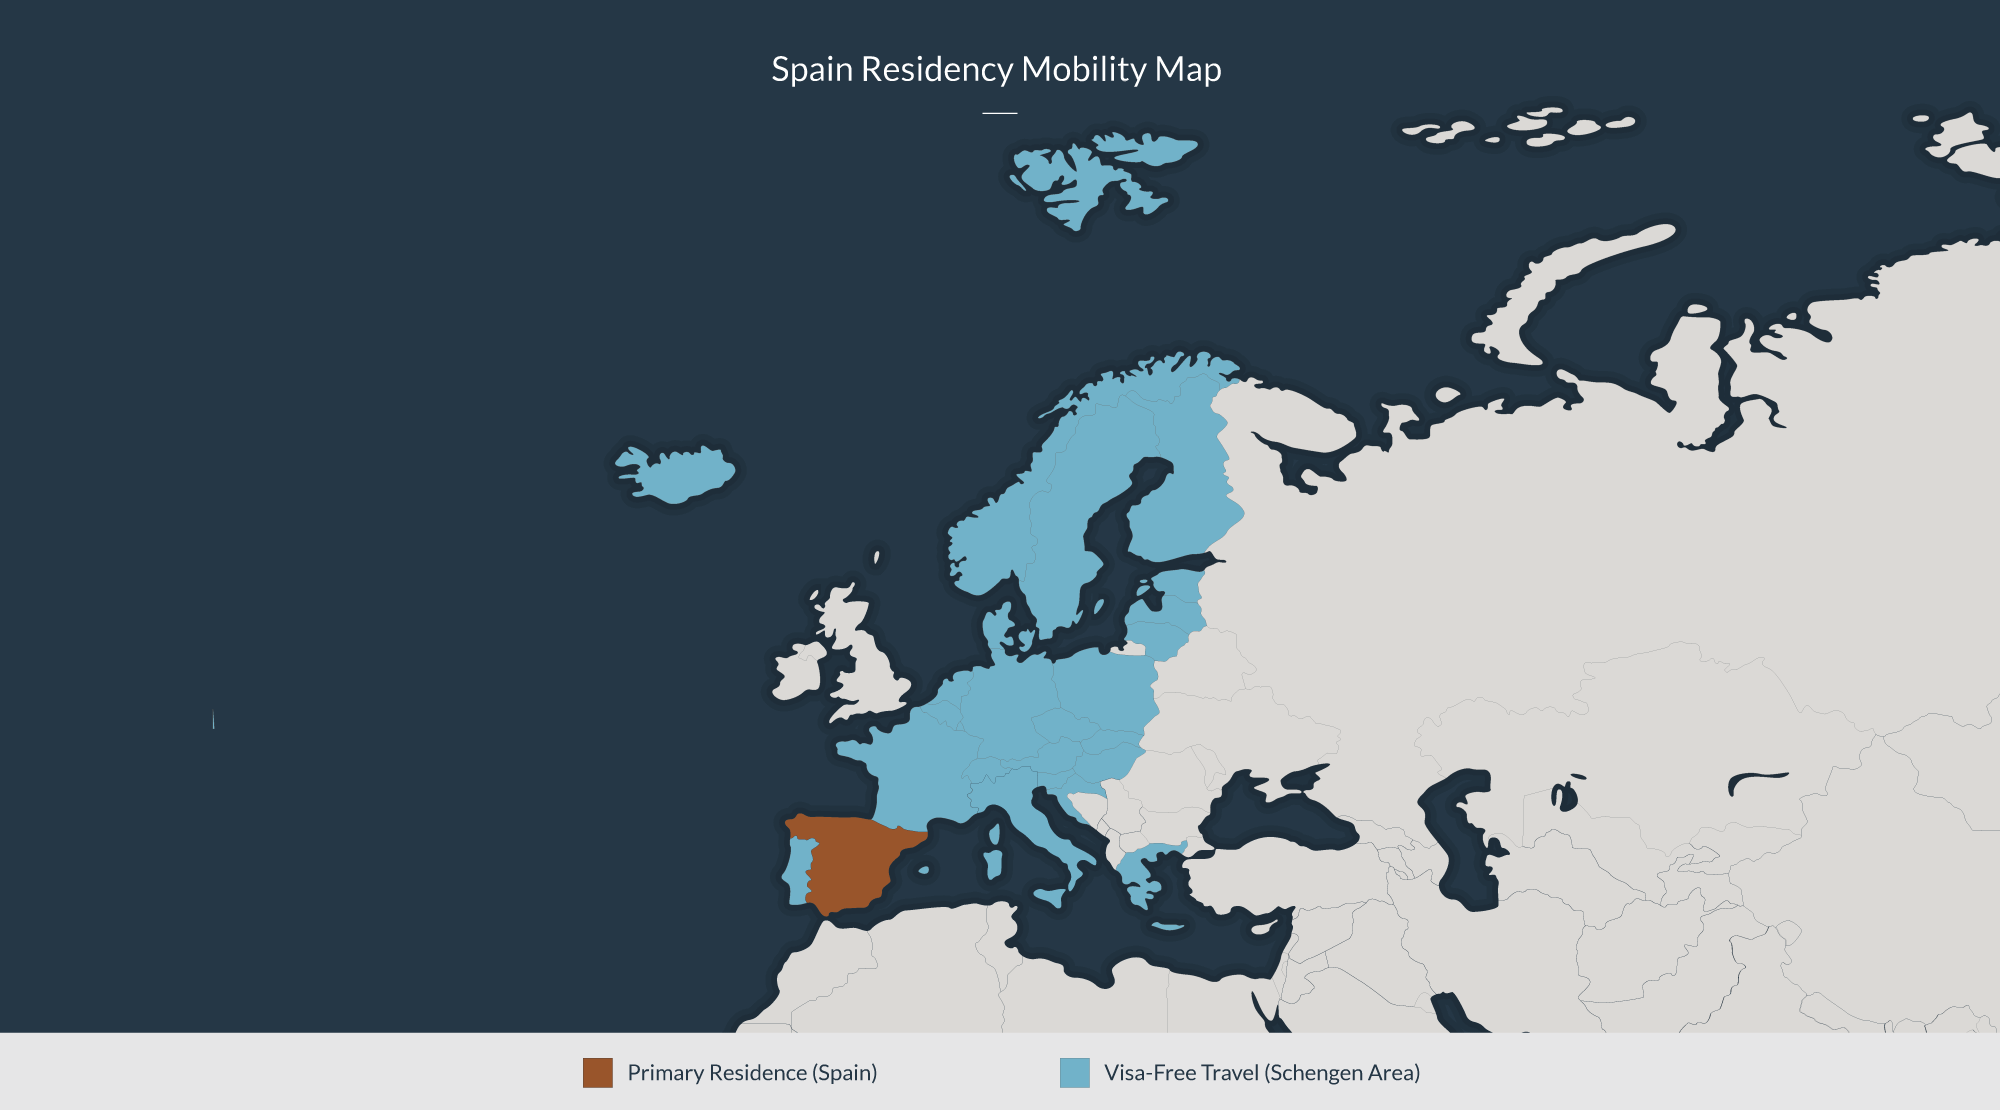 Spain residency mobility map: Primary residence in Spain, Visa-free travel across the Schengen area.